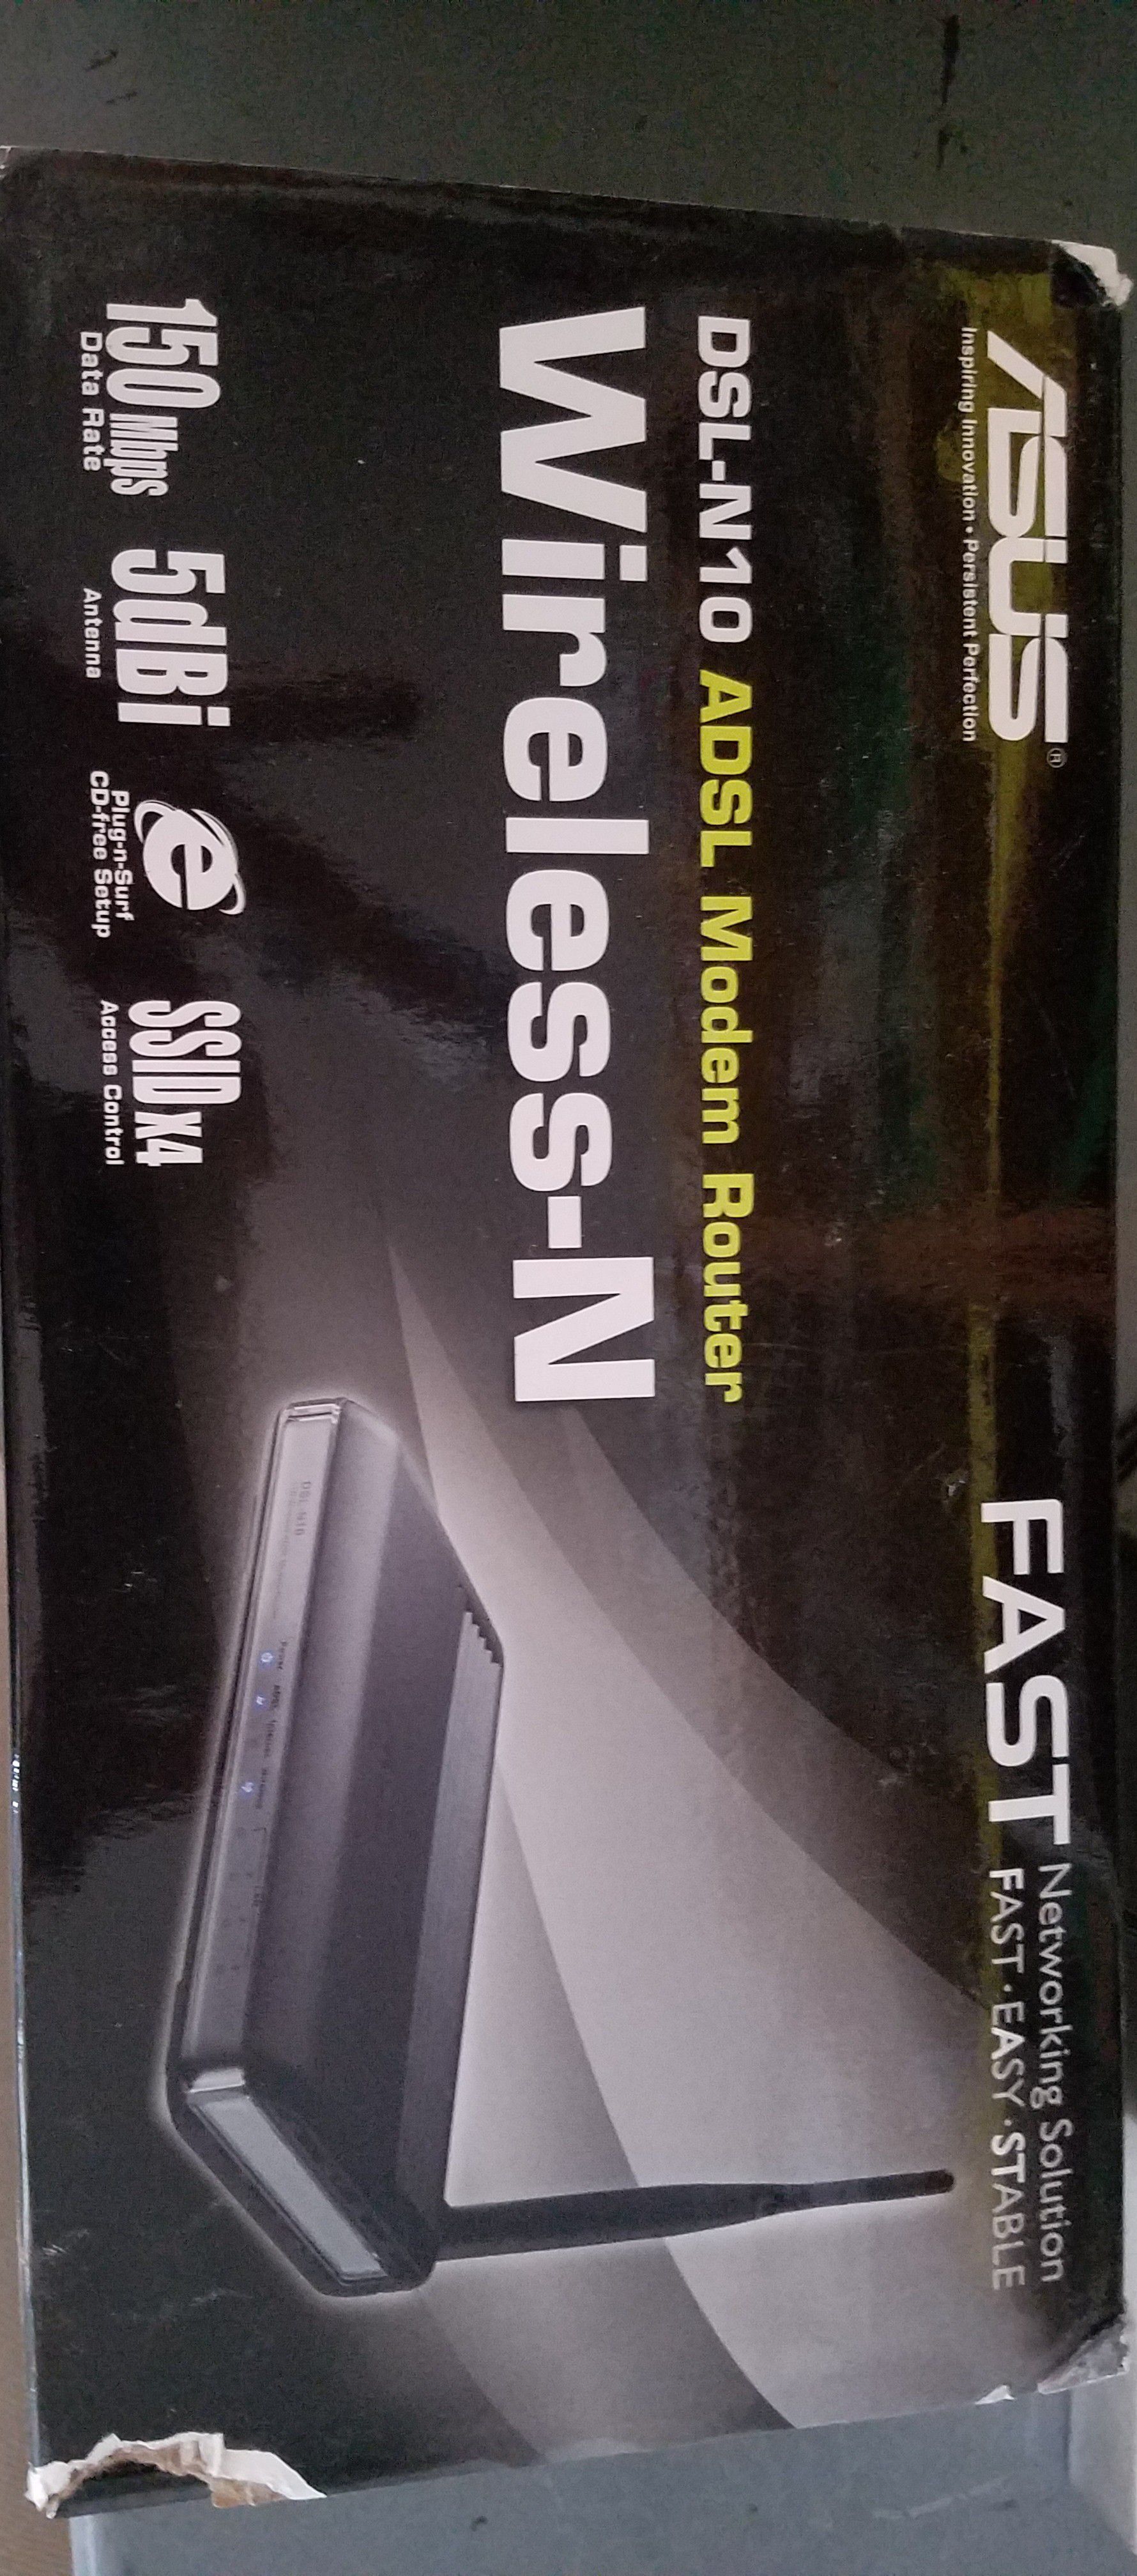 ASUS DSL-N10 Wireless N Fast Modem Router